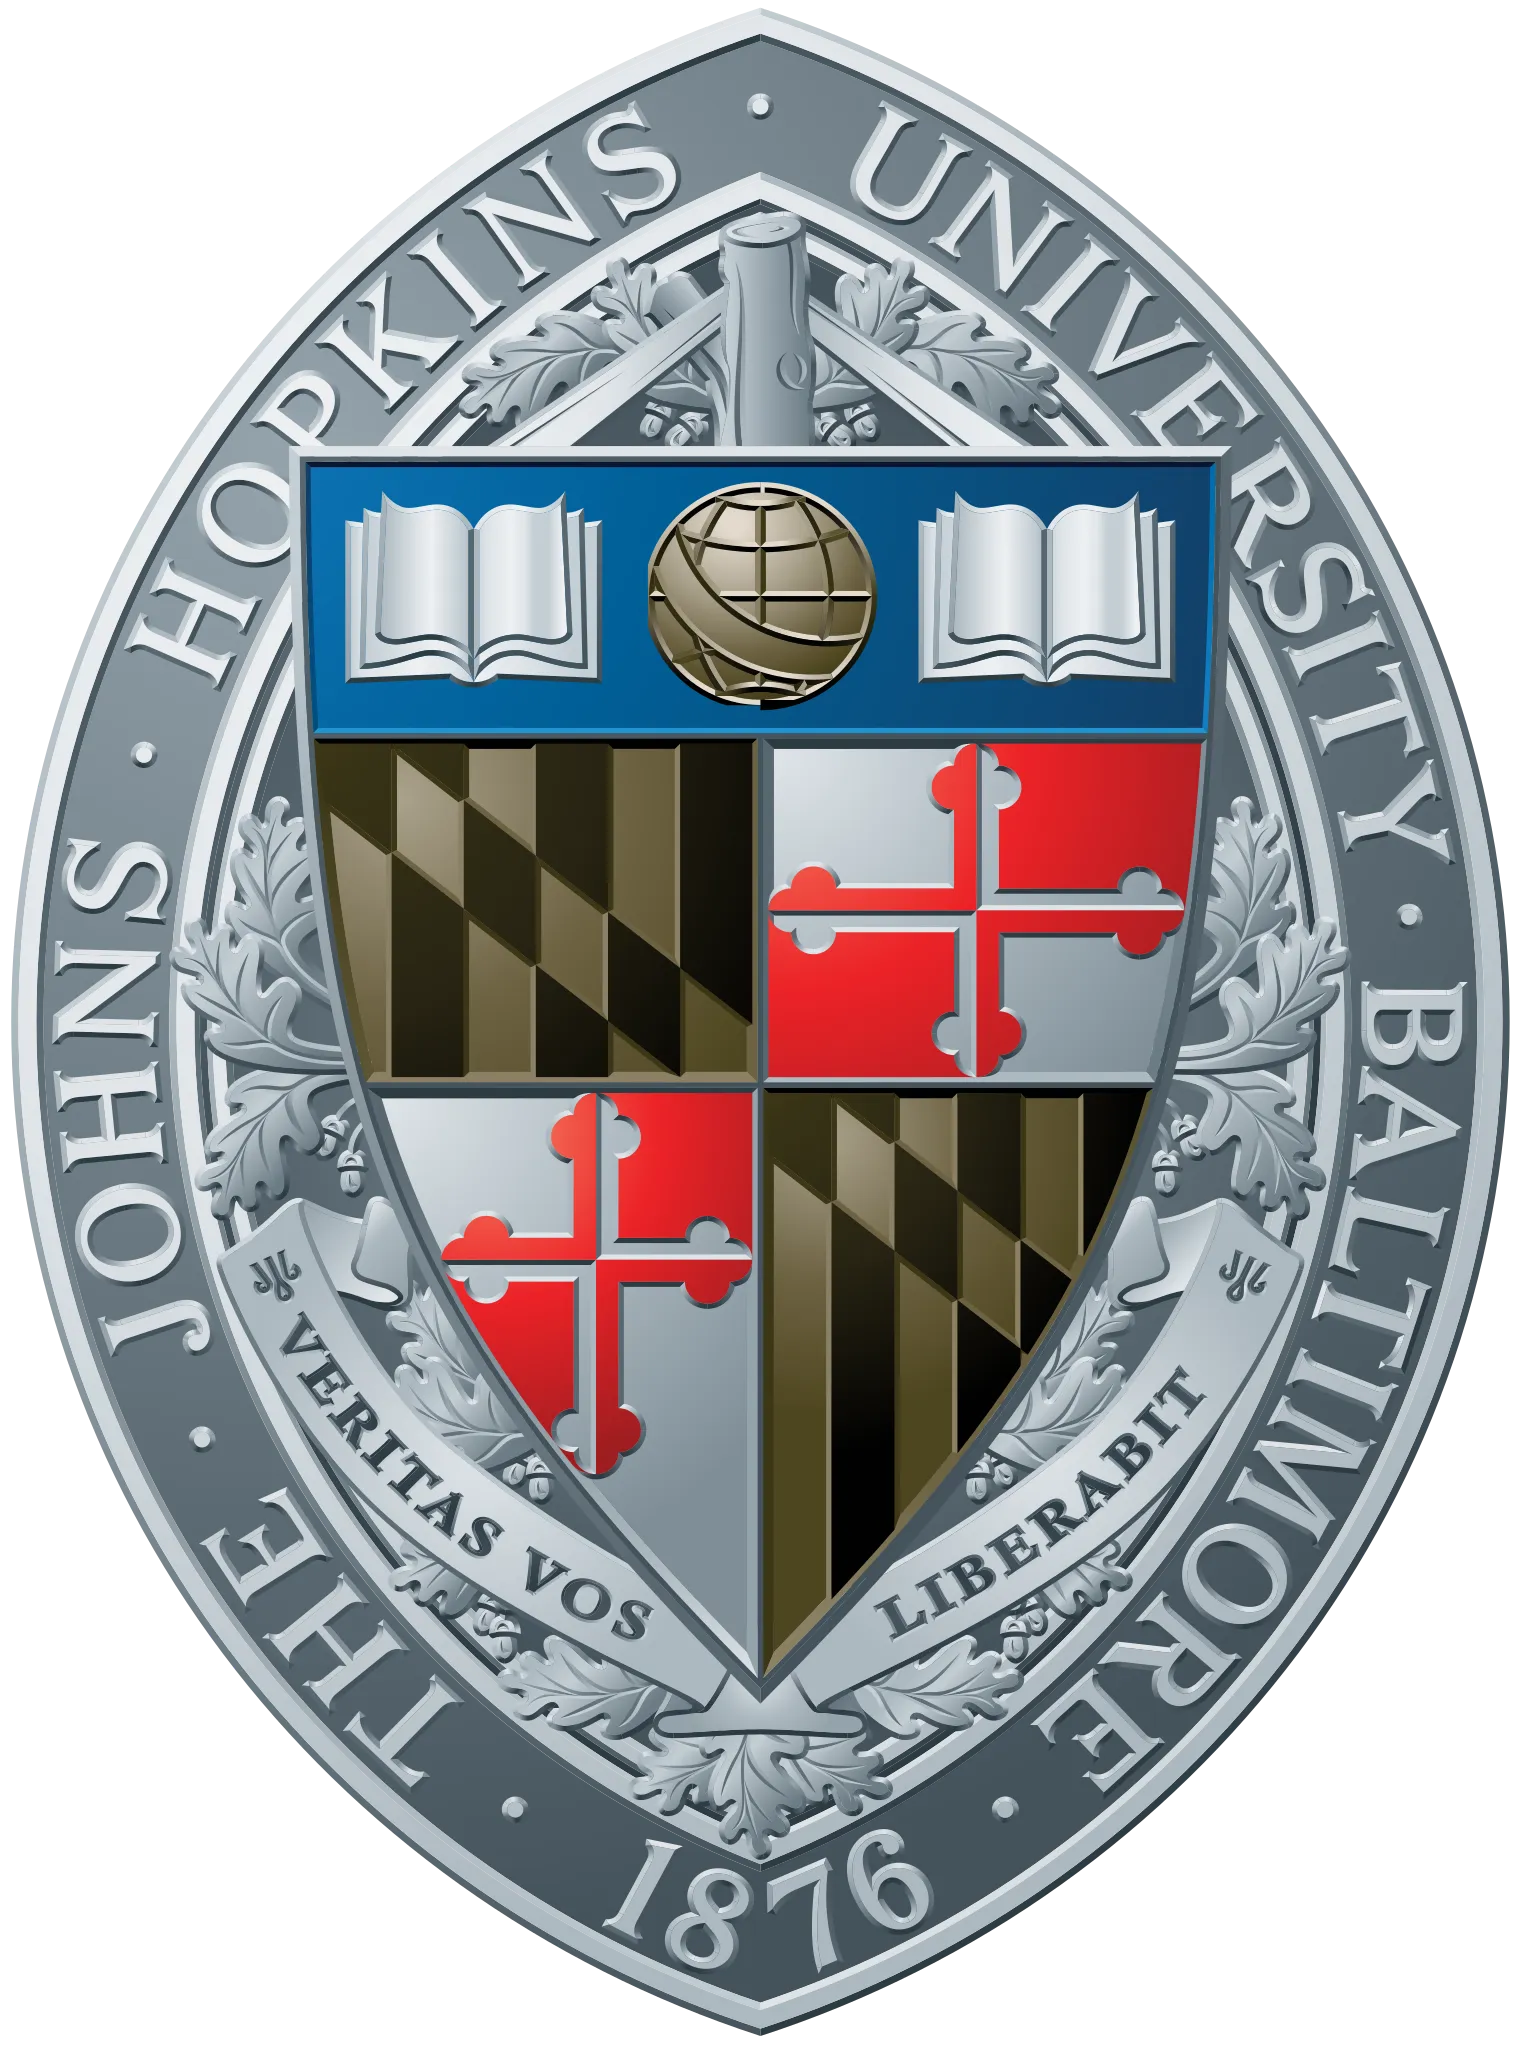 The Seal of the Johns Hopkins University